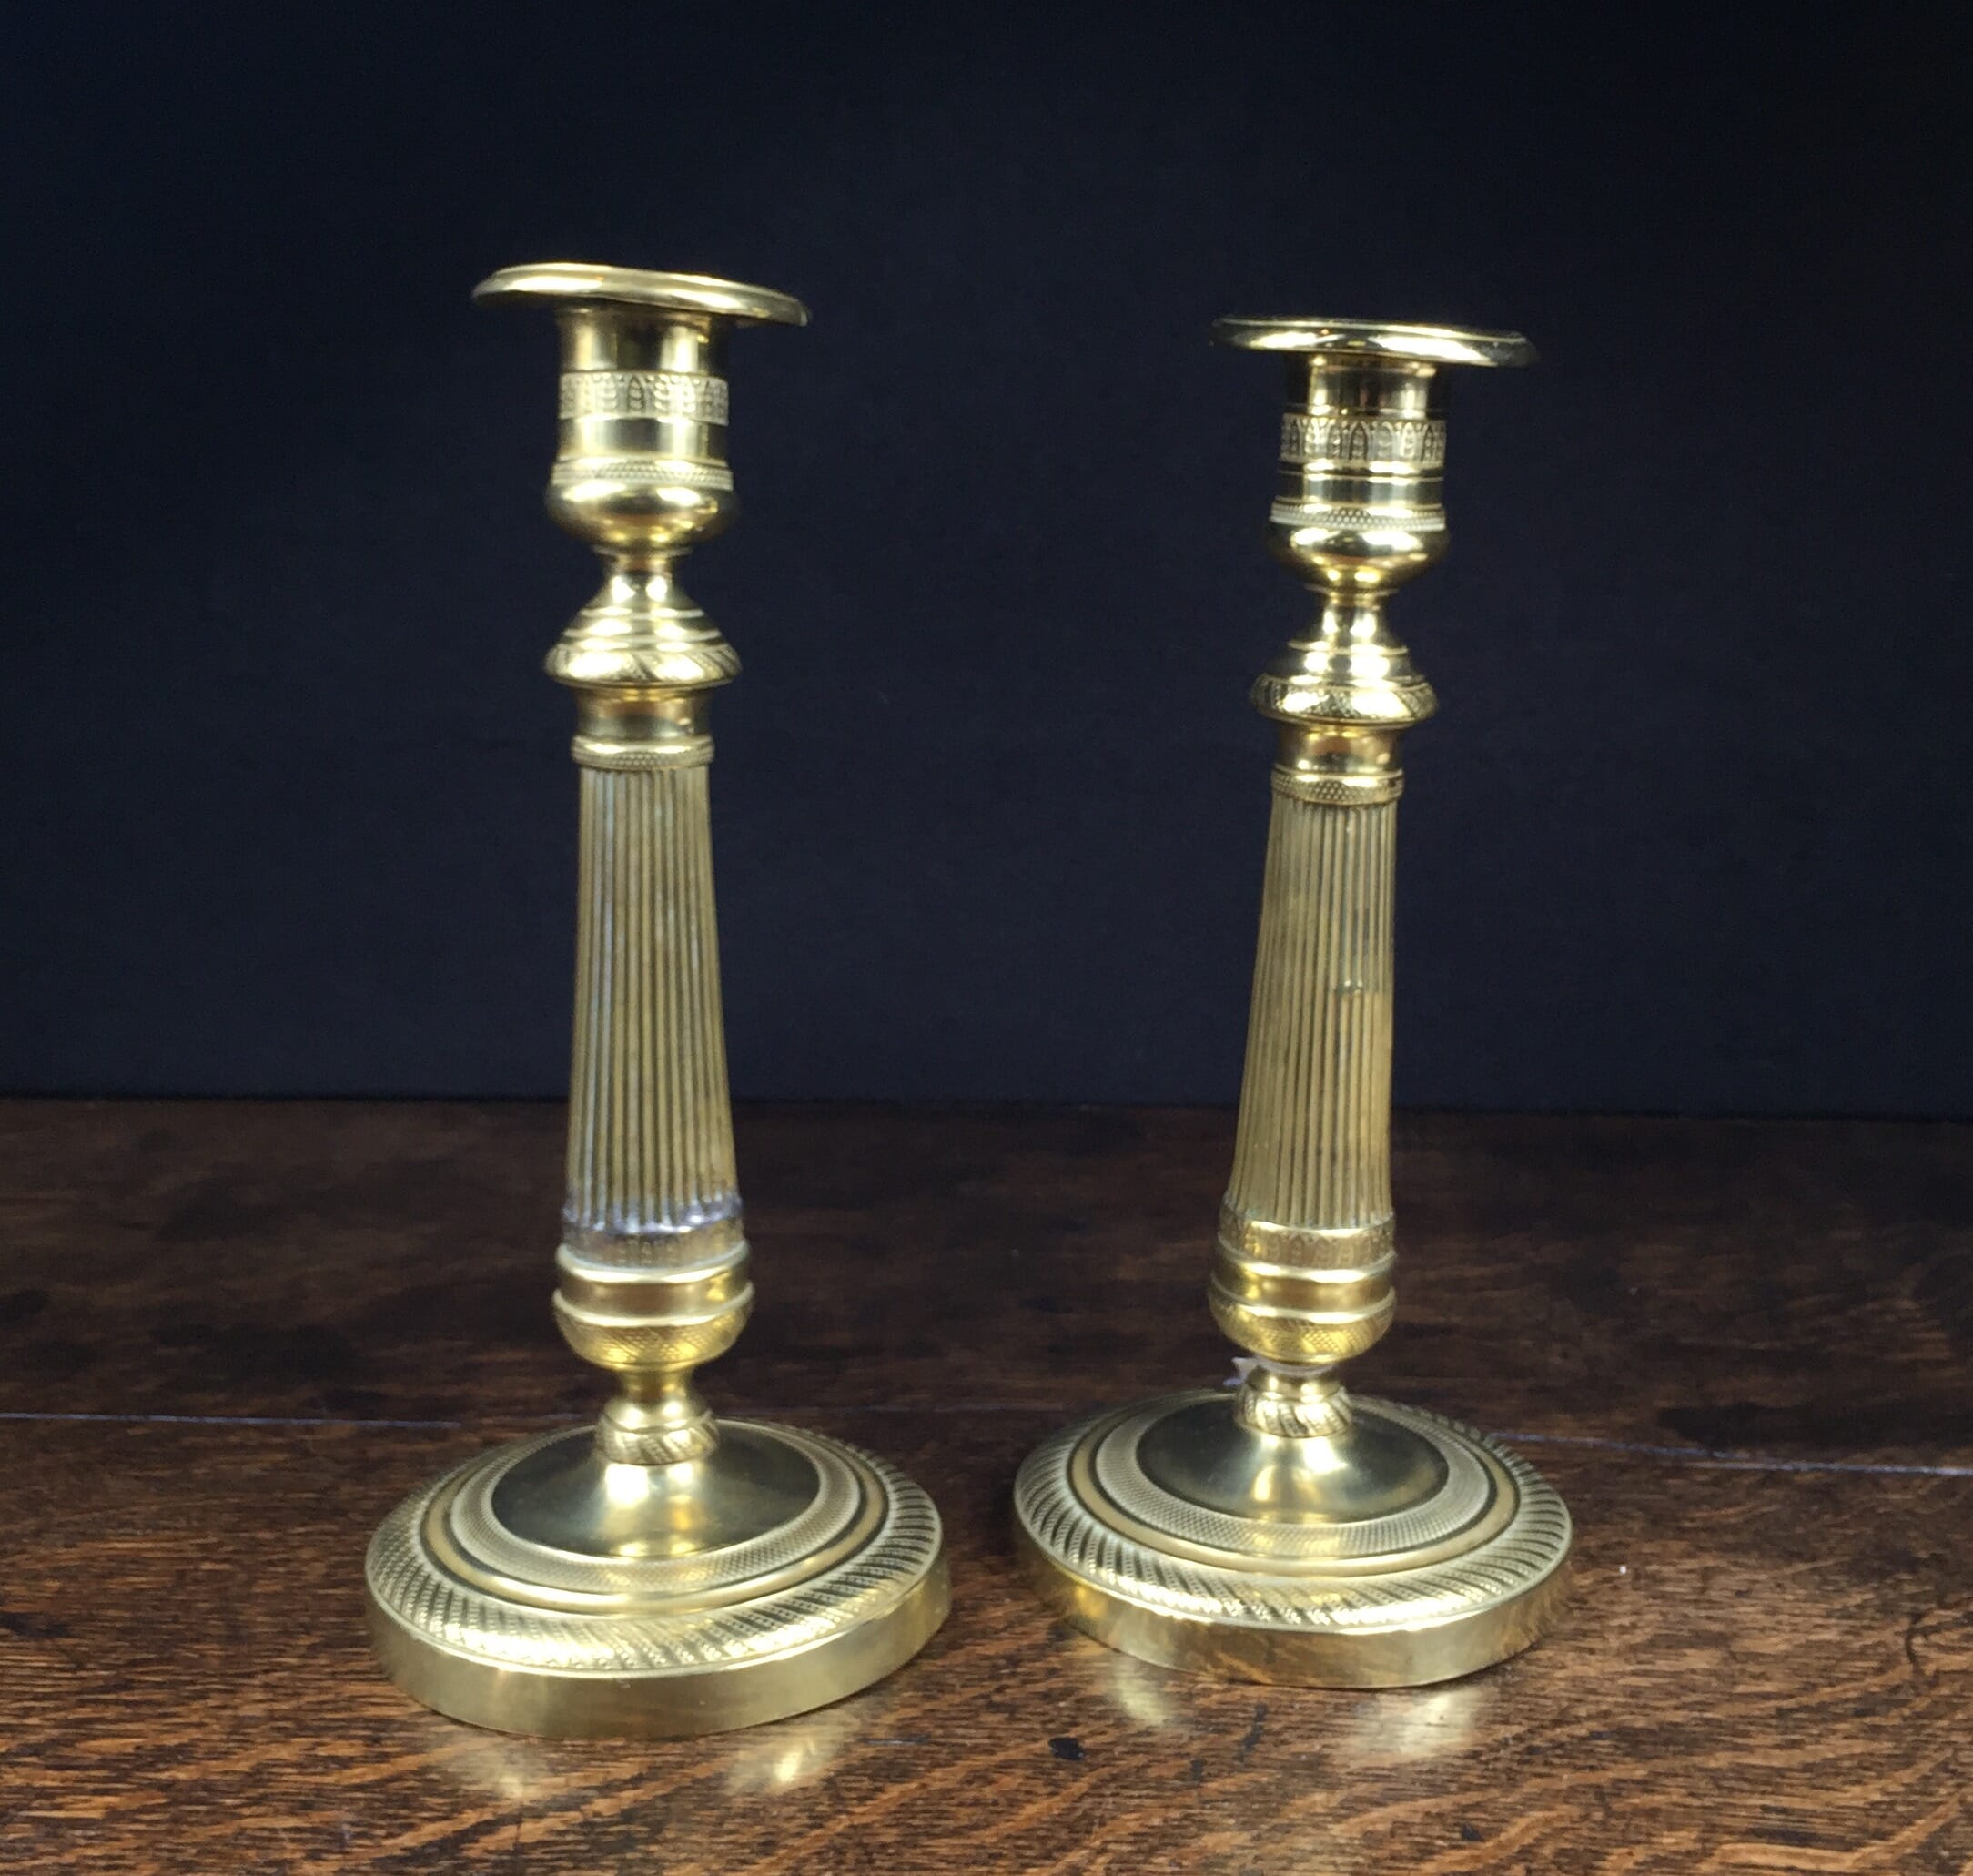 Pair of French Empire Period cast brass candlesticks (1800-10)